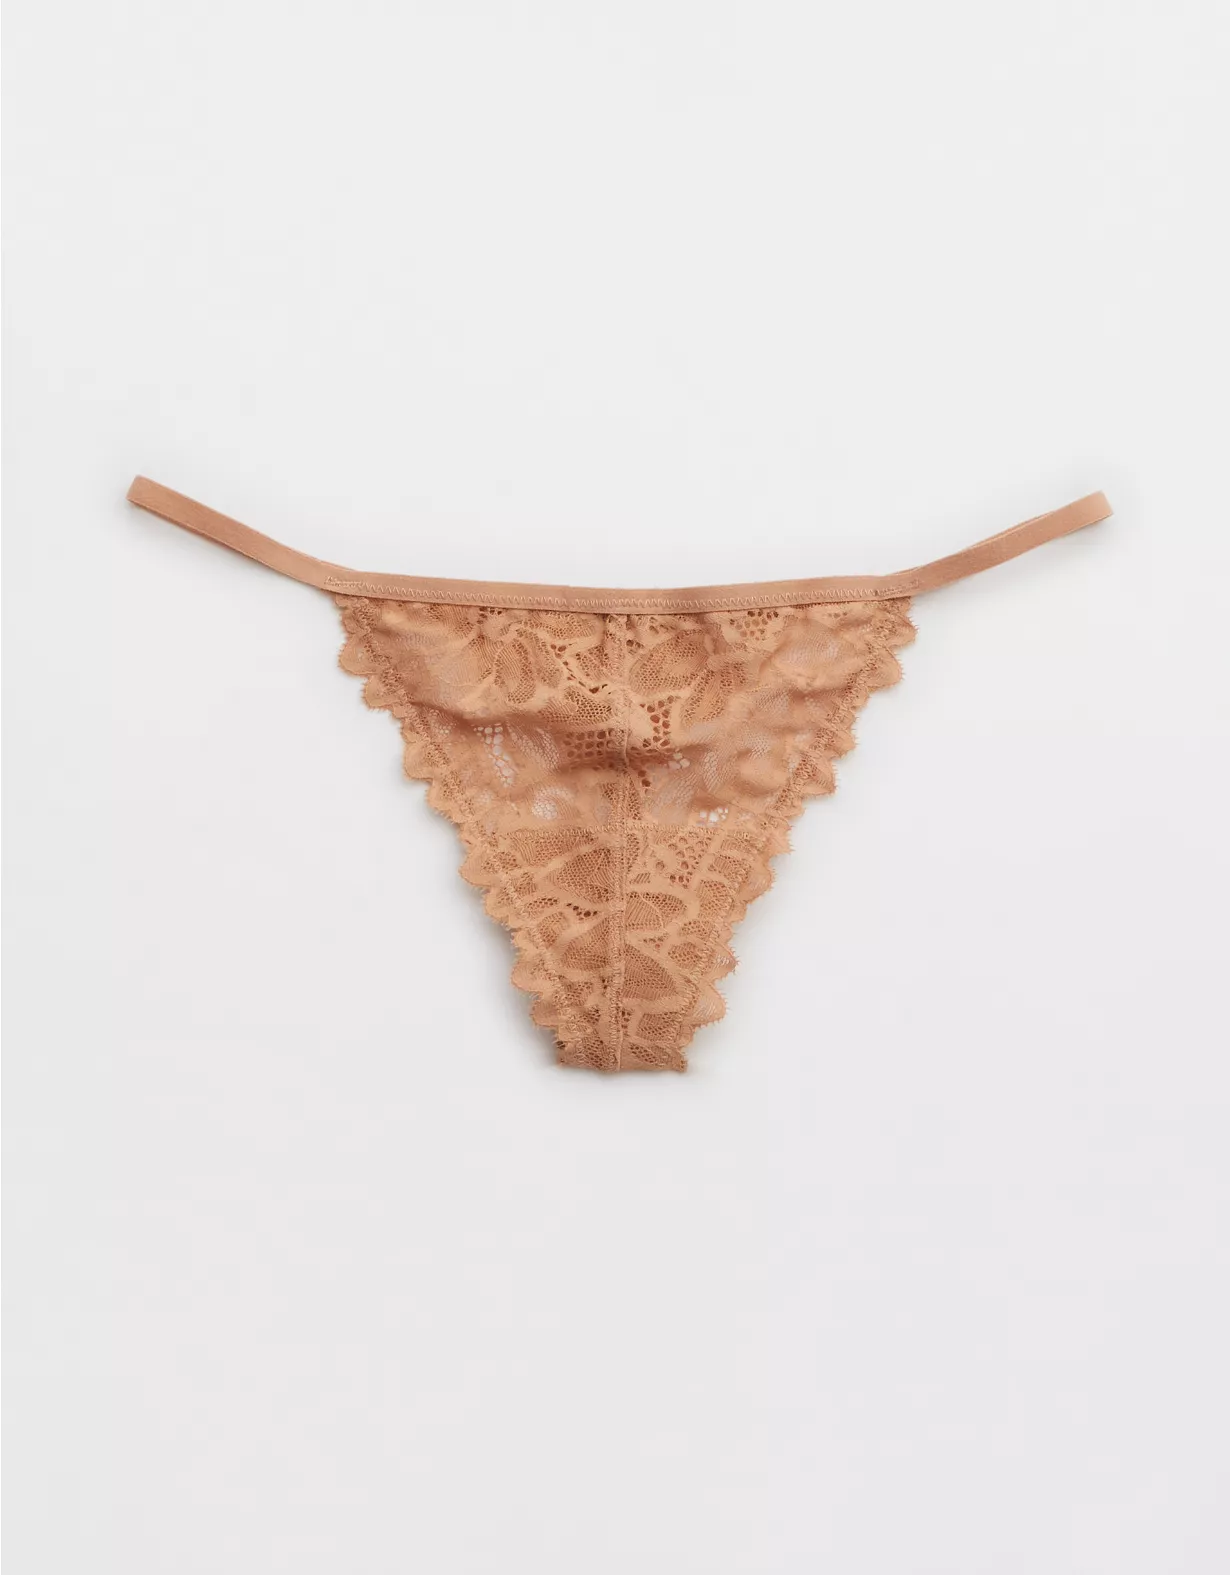 Aerie Sunkissed Lace String Thong Underwear